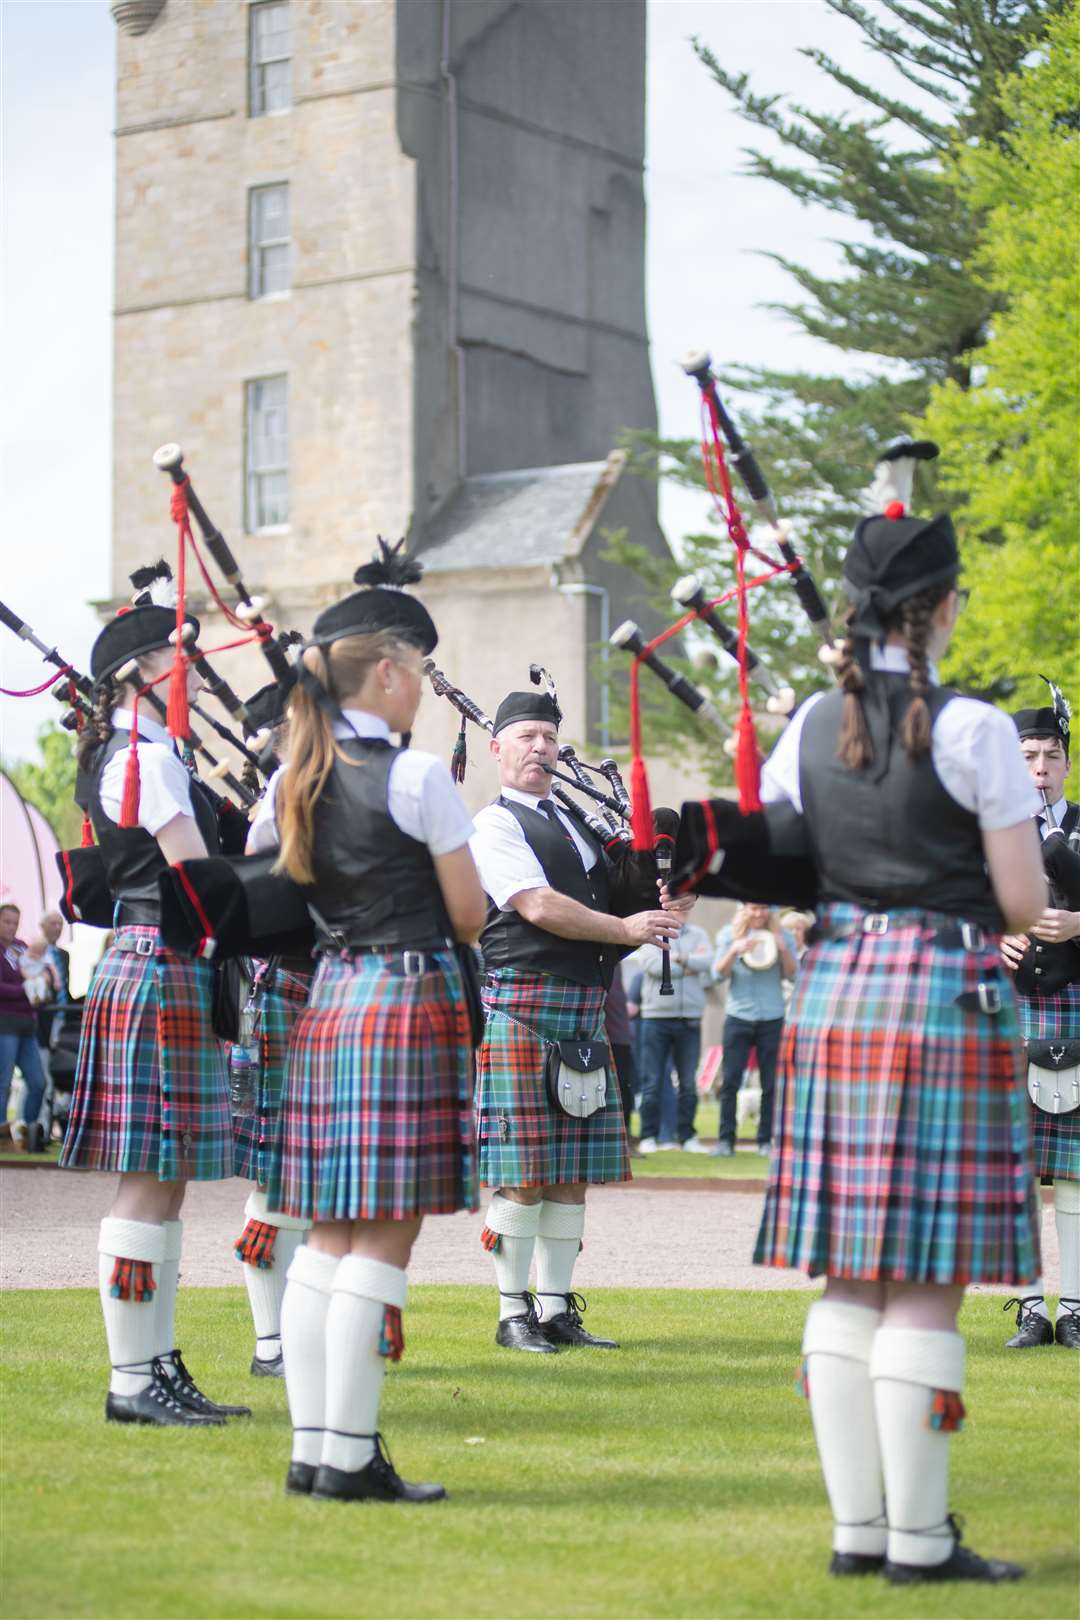 The Strathisla Pipe Band from Keith will be part of the event.